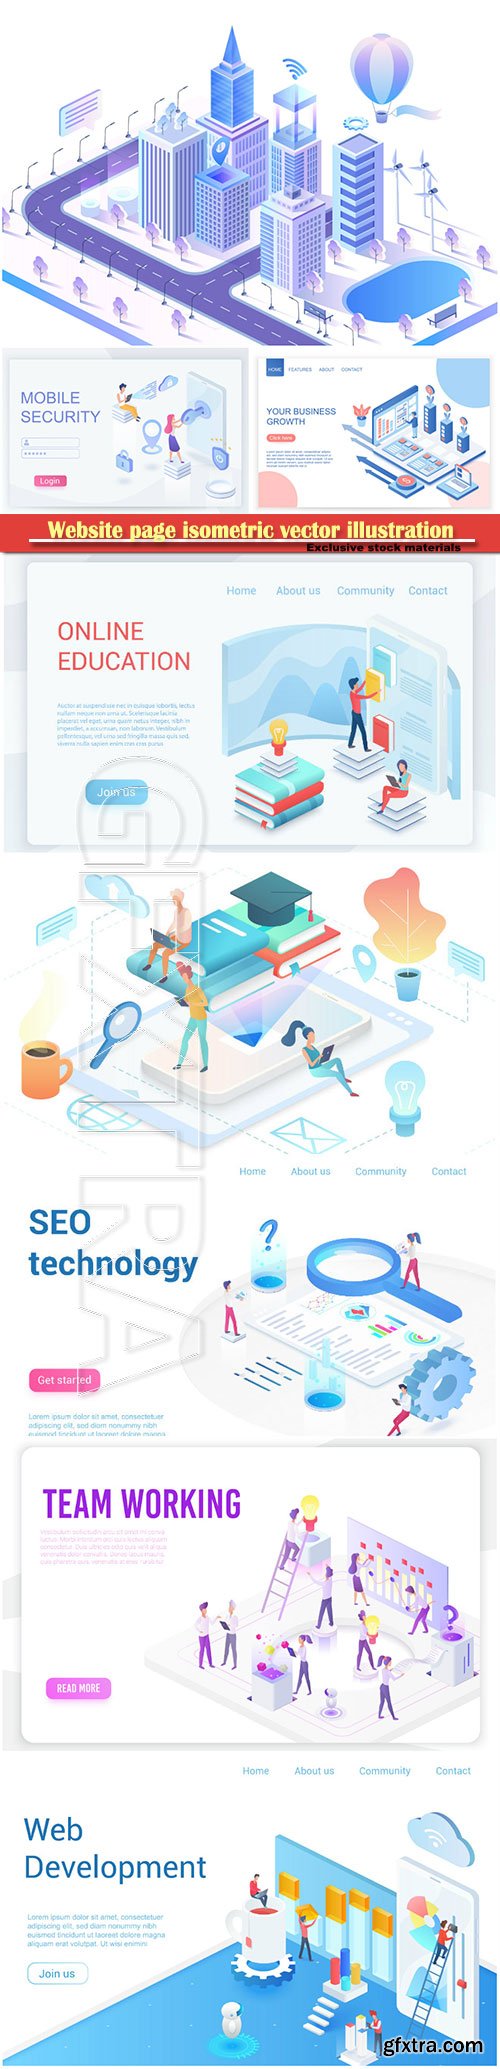 Website page isometric vector illustration, flat banner # 9